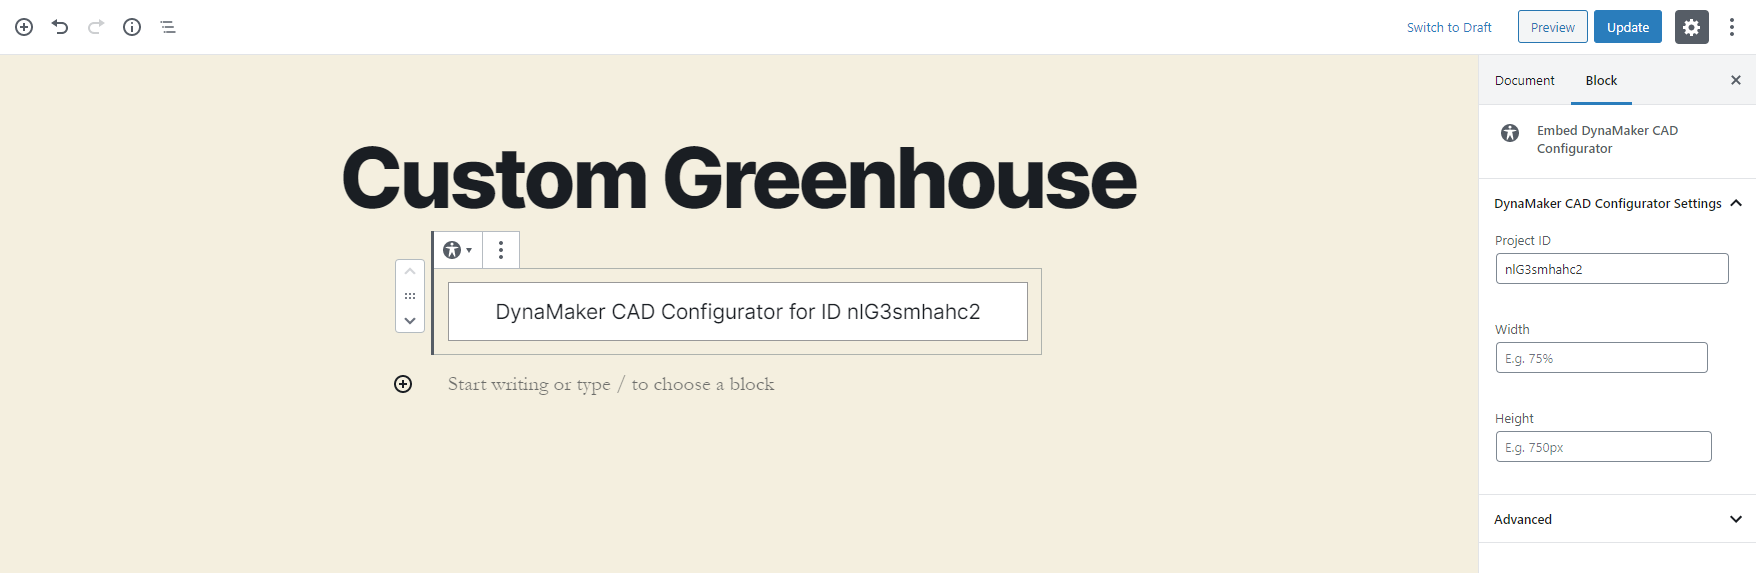 The DynaMaker CAD Configurator block and its settings in the Wordpress editor